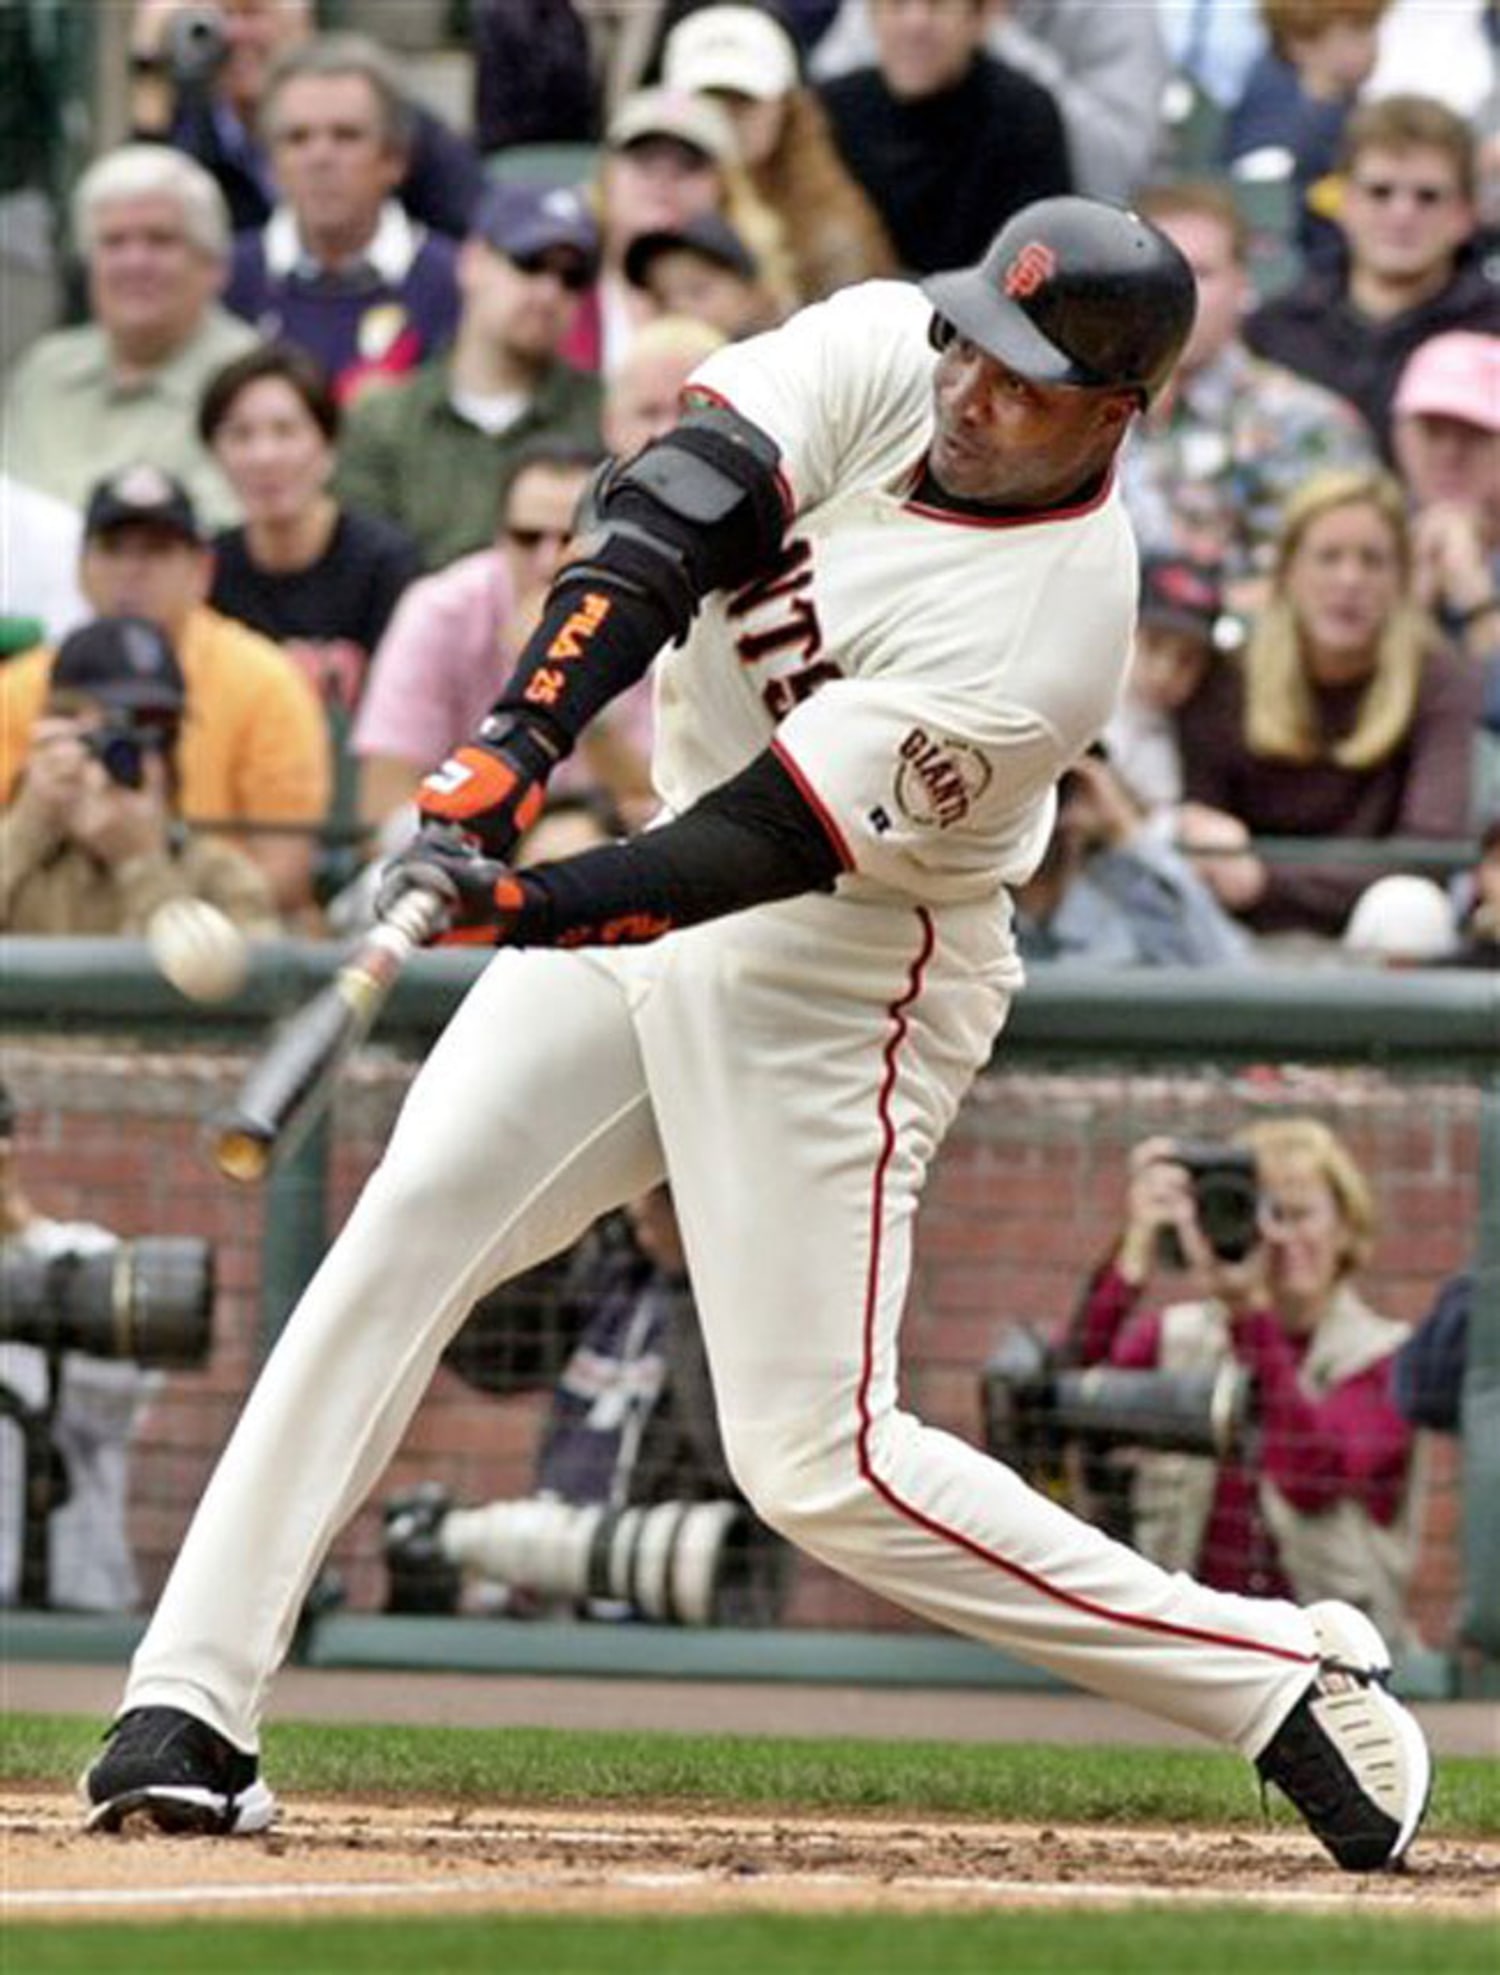 Key to Barry Bonds' success is eyeing the ball